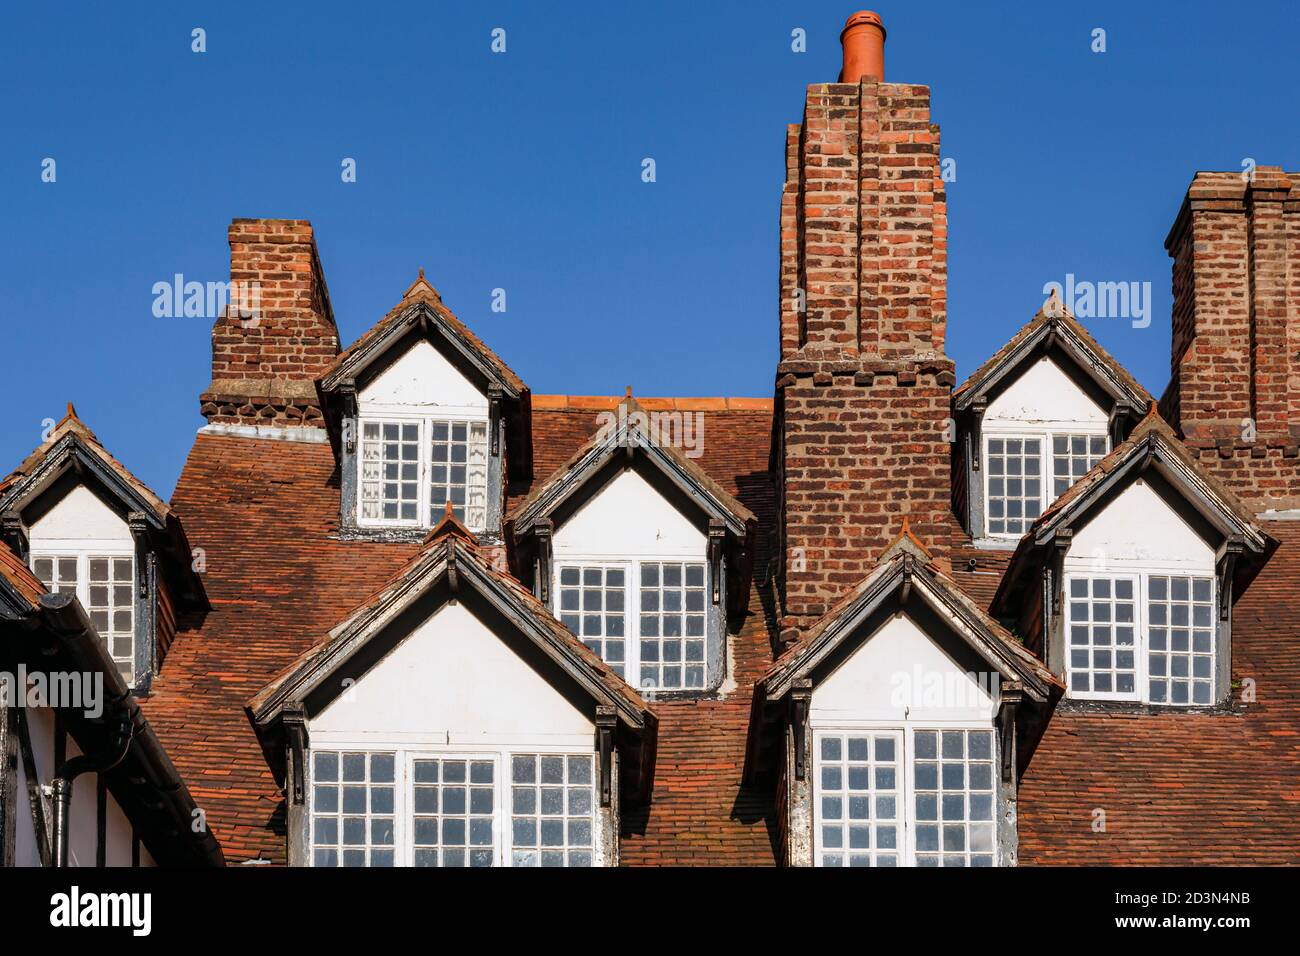 Ruthin, Denbighshire, Wales, United Kingdom.  Windows in the Dutch style building housing the Myddleton Arms, which was built in the mid 16th century. Stock Photo